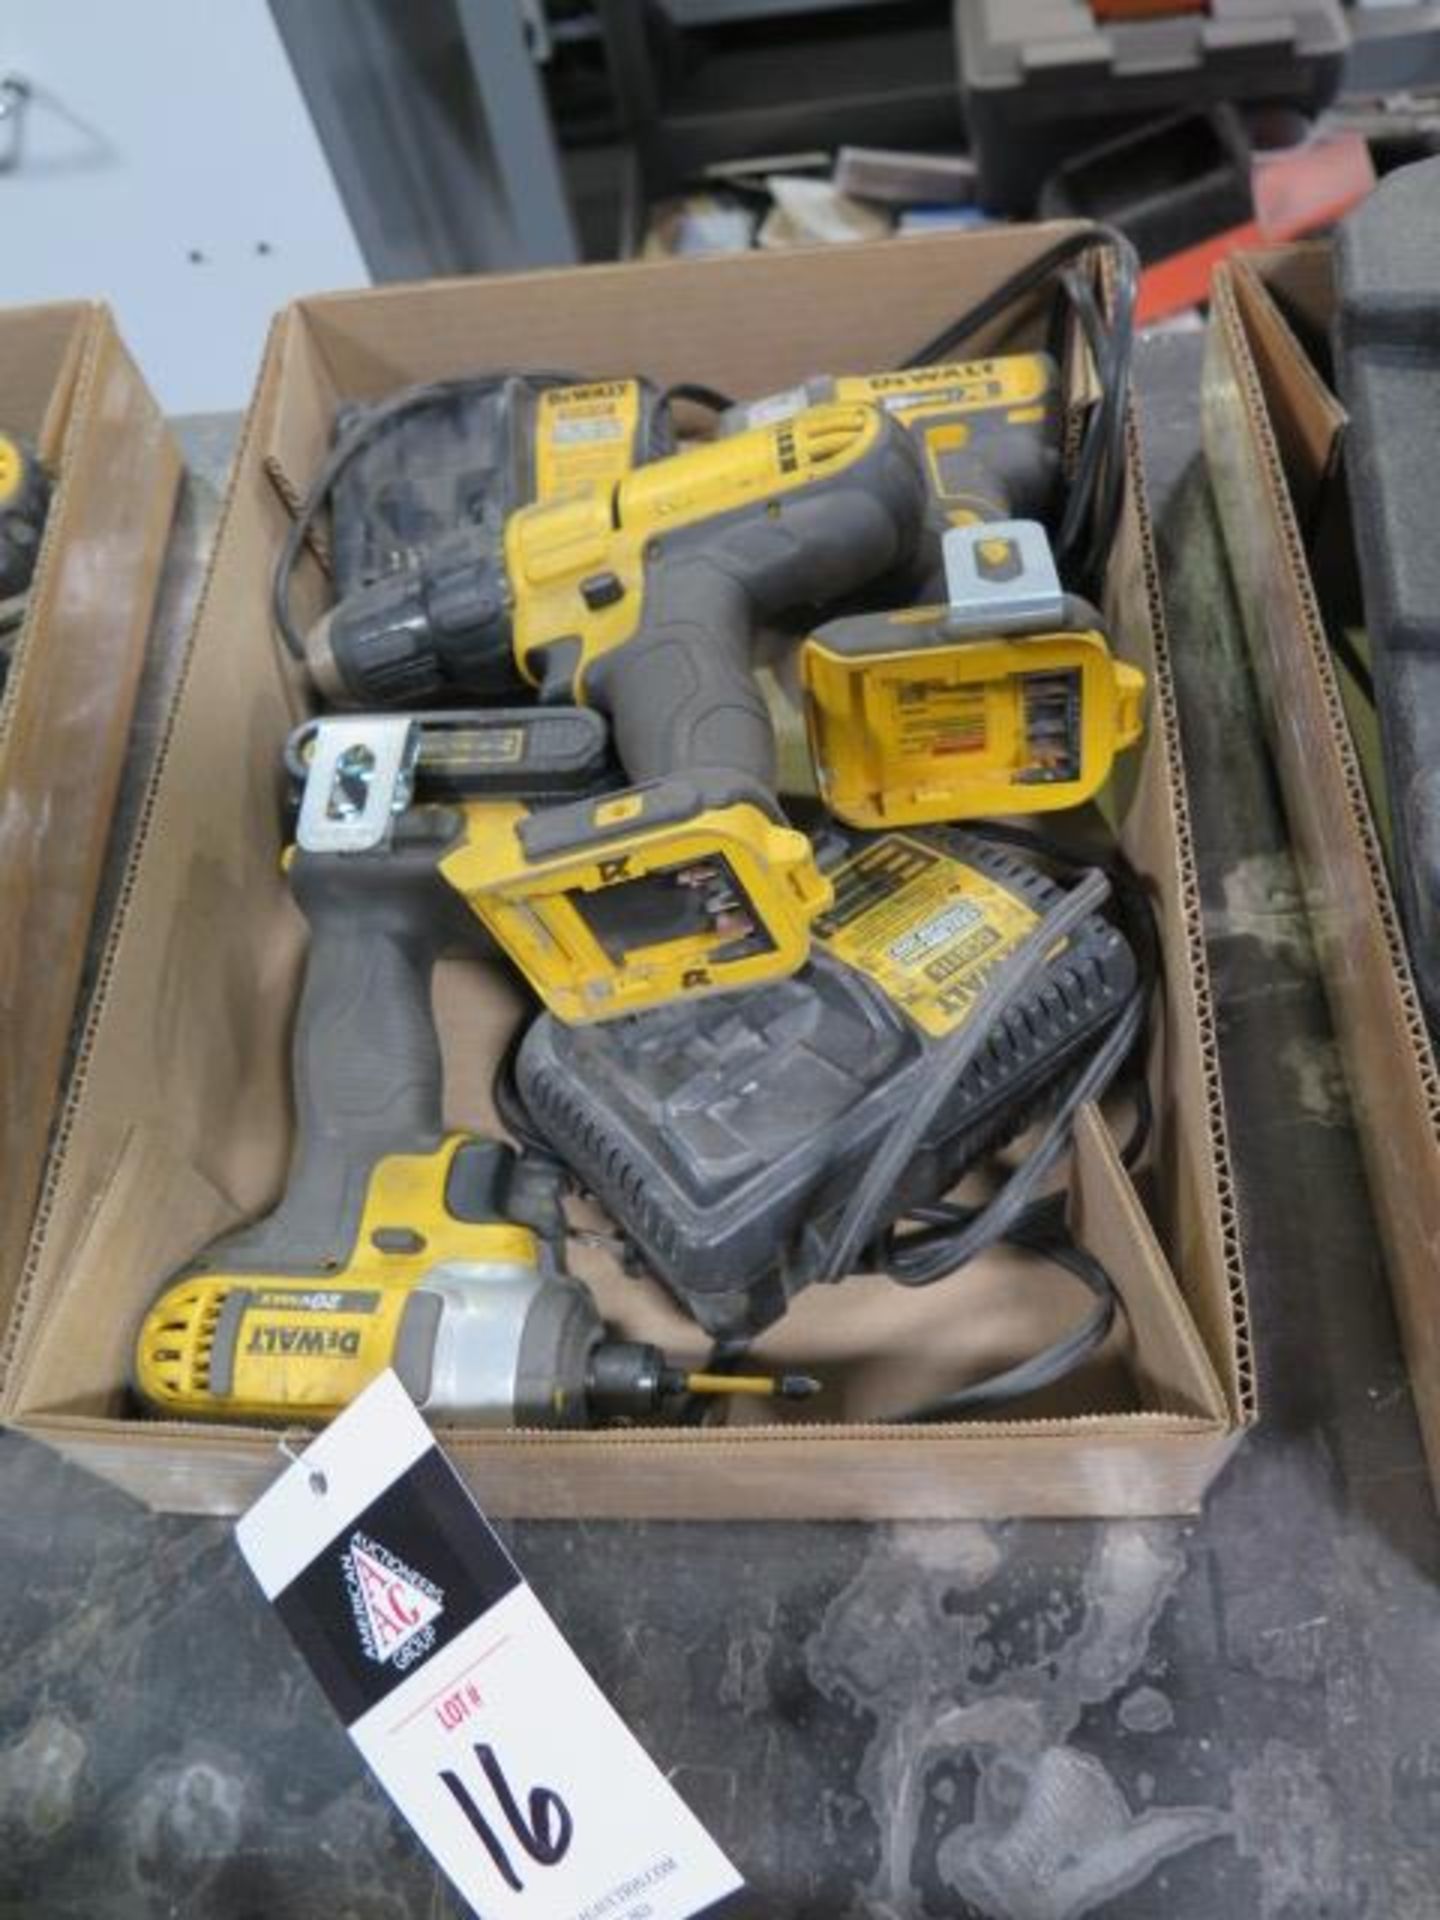 DeWalt 20 Volt Cordless Drills and Nut Drivers w/ Charger (SOLD AS-IS - NO WARRANTY)